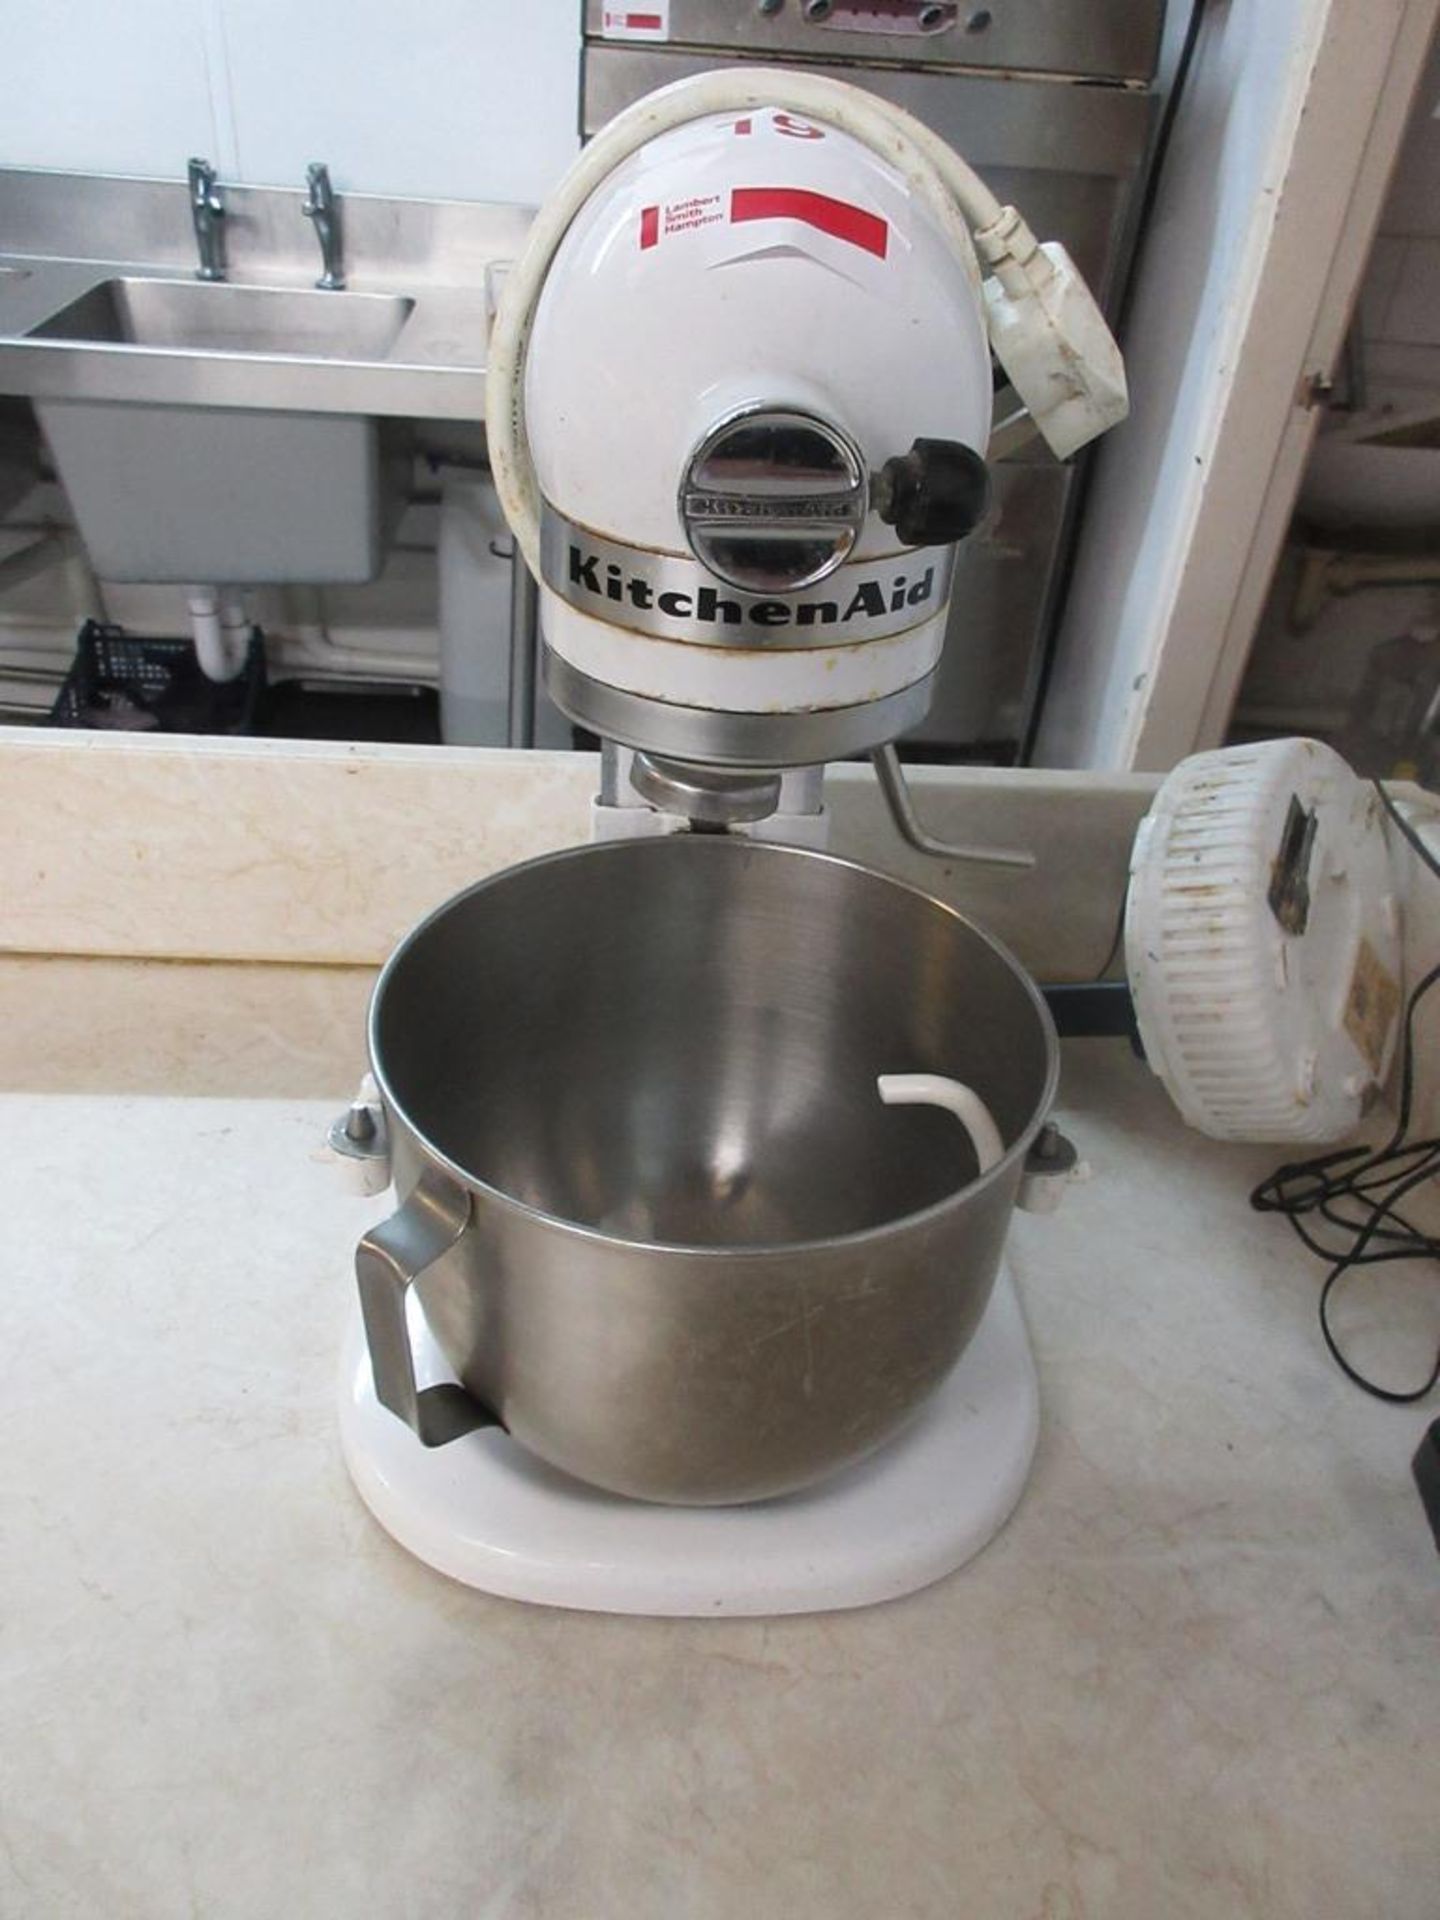 KitchenAid Heavy Duty bench top mixer, model 5KPMS and Station dial bench top weighing scales 44Ib x